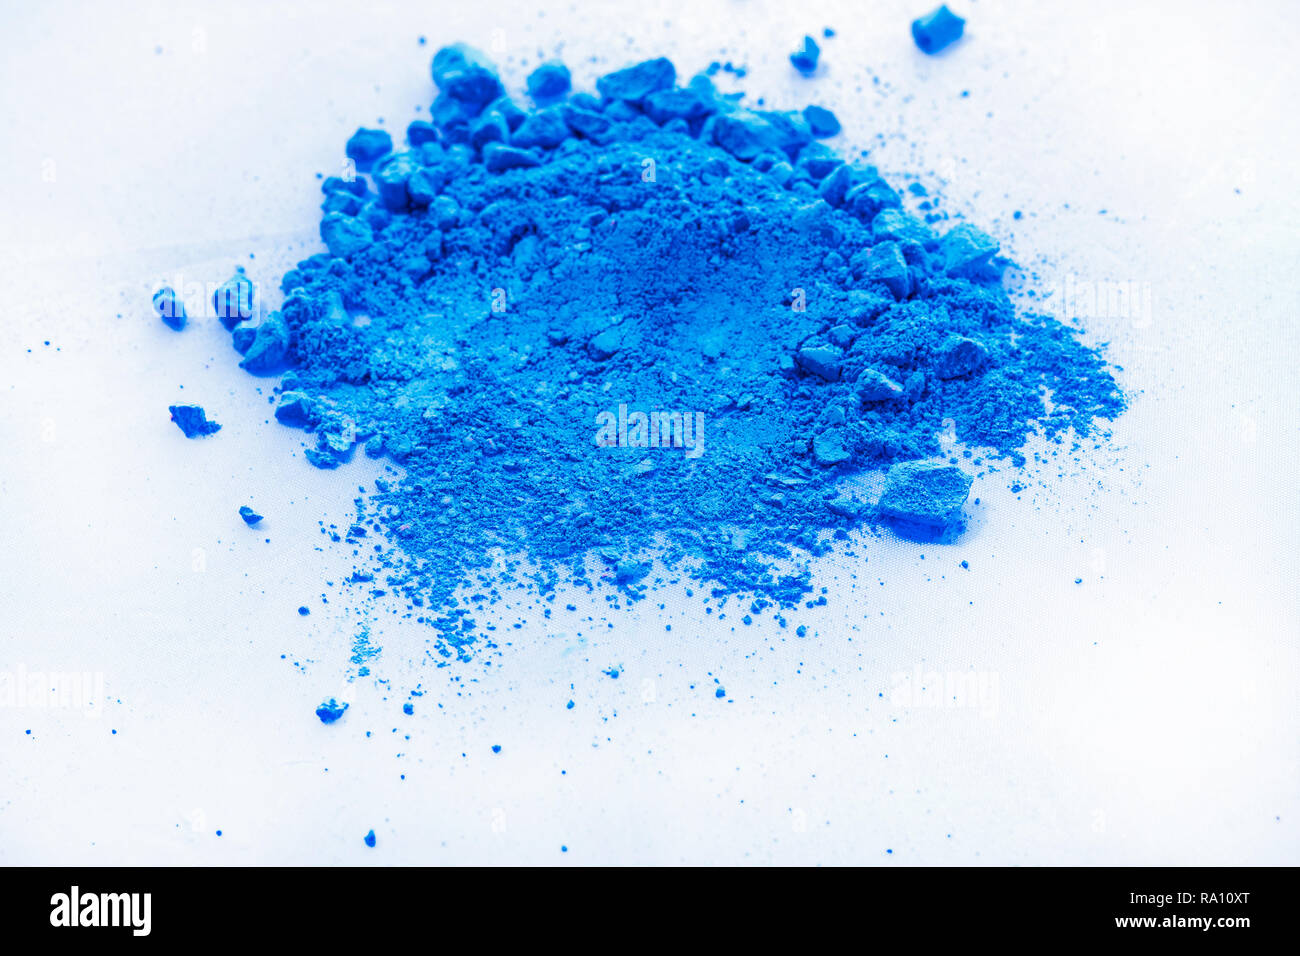 Blue color background of chalk powder. Blue color dust particles splattered  on white background Stock Photo - Alamy